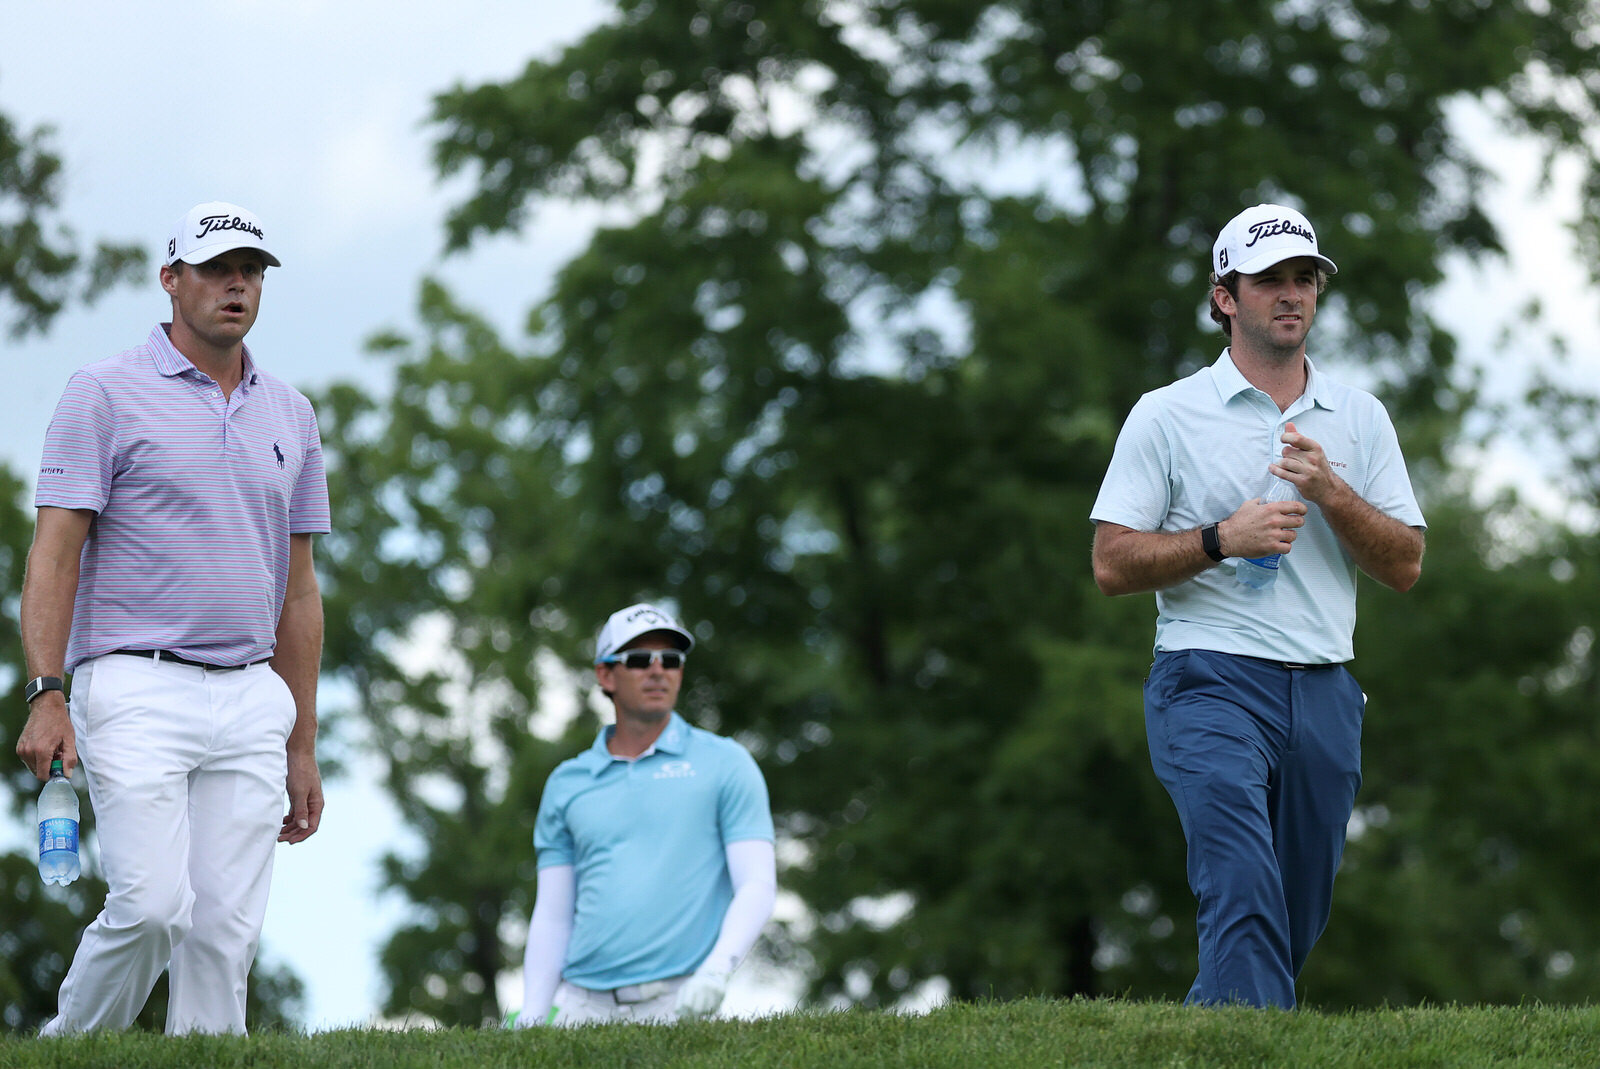  DUBLIN, OHIO - JULY 10: Nick Watney of the United States, Dylan Frittelli of South Africa and Denny McCarthy of the United States look on during the second round of the Workday Charity Open on July 10, 2020 at Muirfield Village Golf Club in Dublin, 